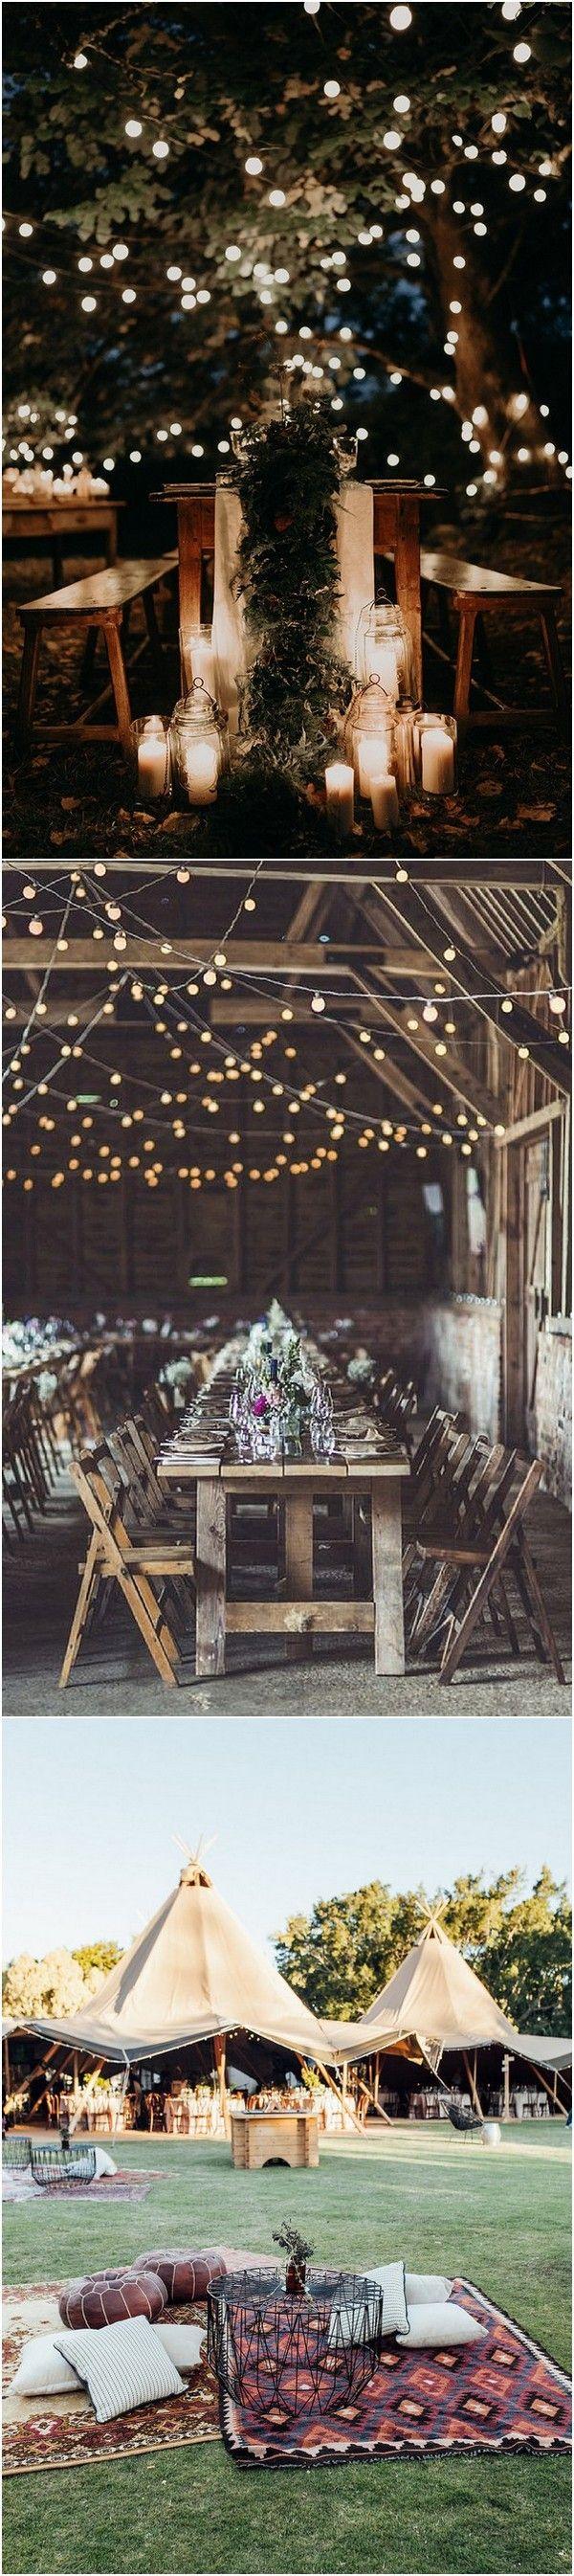 Hochzeit - Trending-30 Boho Chic Wedding Ideas For 2018 - Page 2 Of 3